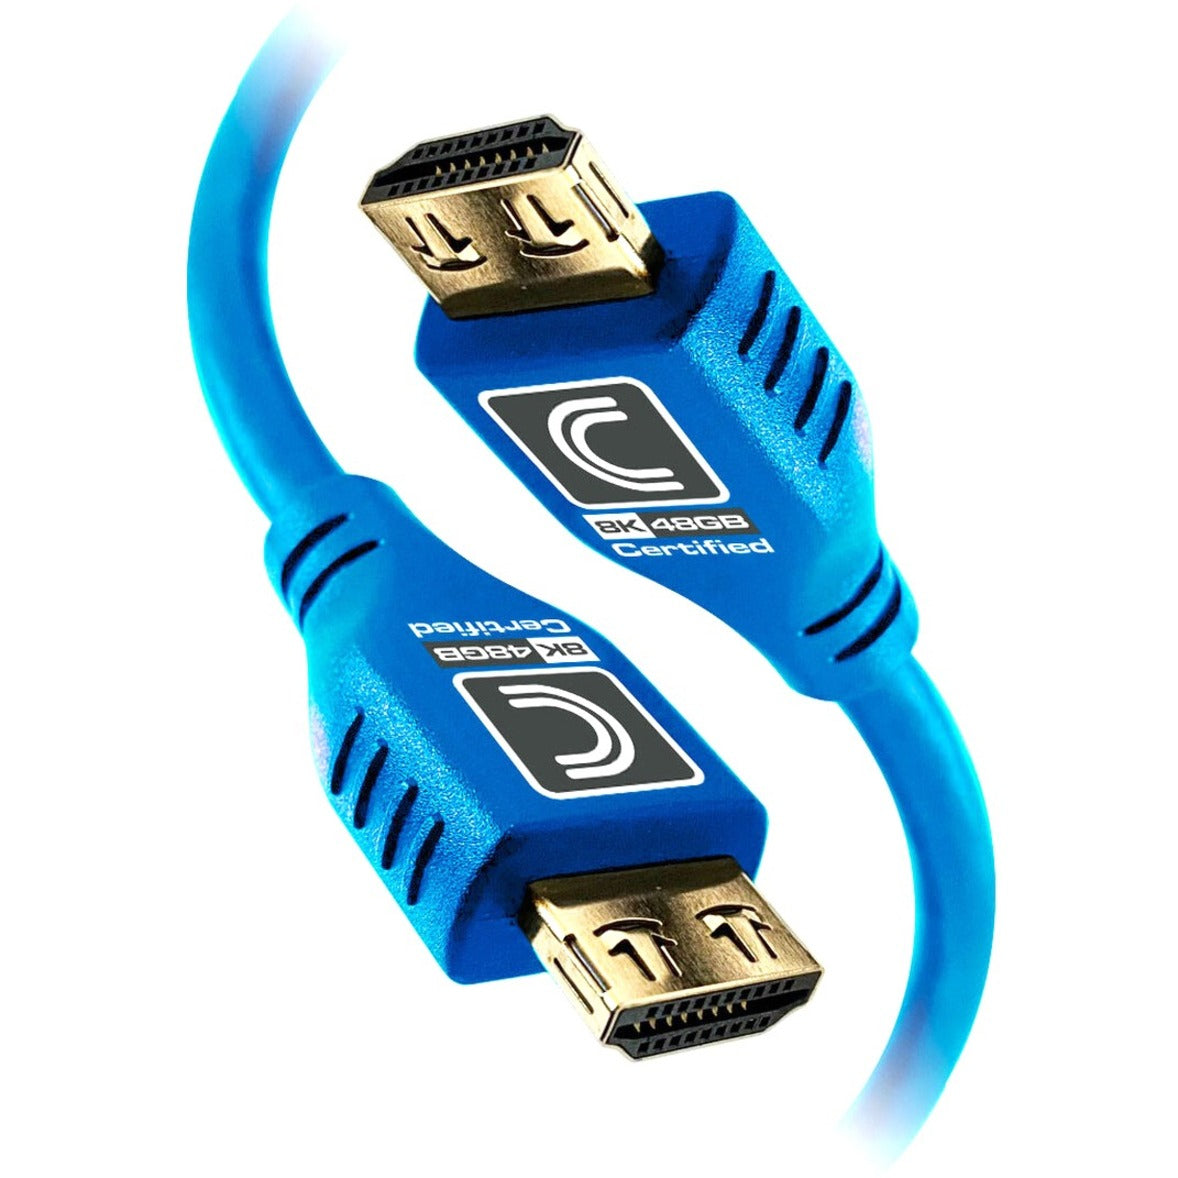 Comprehensive MHD48G-9PROBLU MicroFlex Pro AV/IT HDMI A/V Cable, 9 ft, EMI/RF Protection, Ultra Flexible, Gold Plated